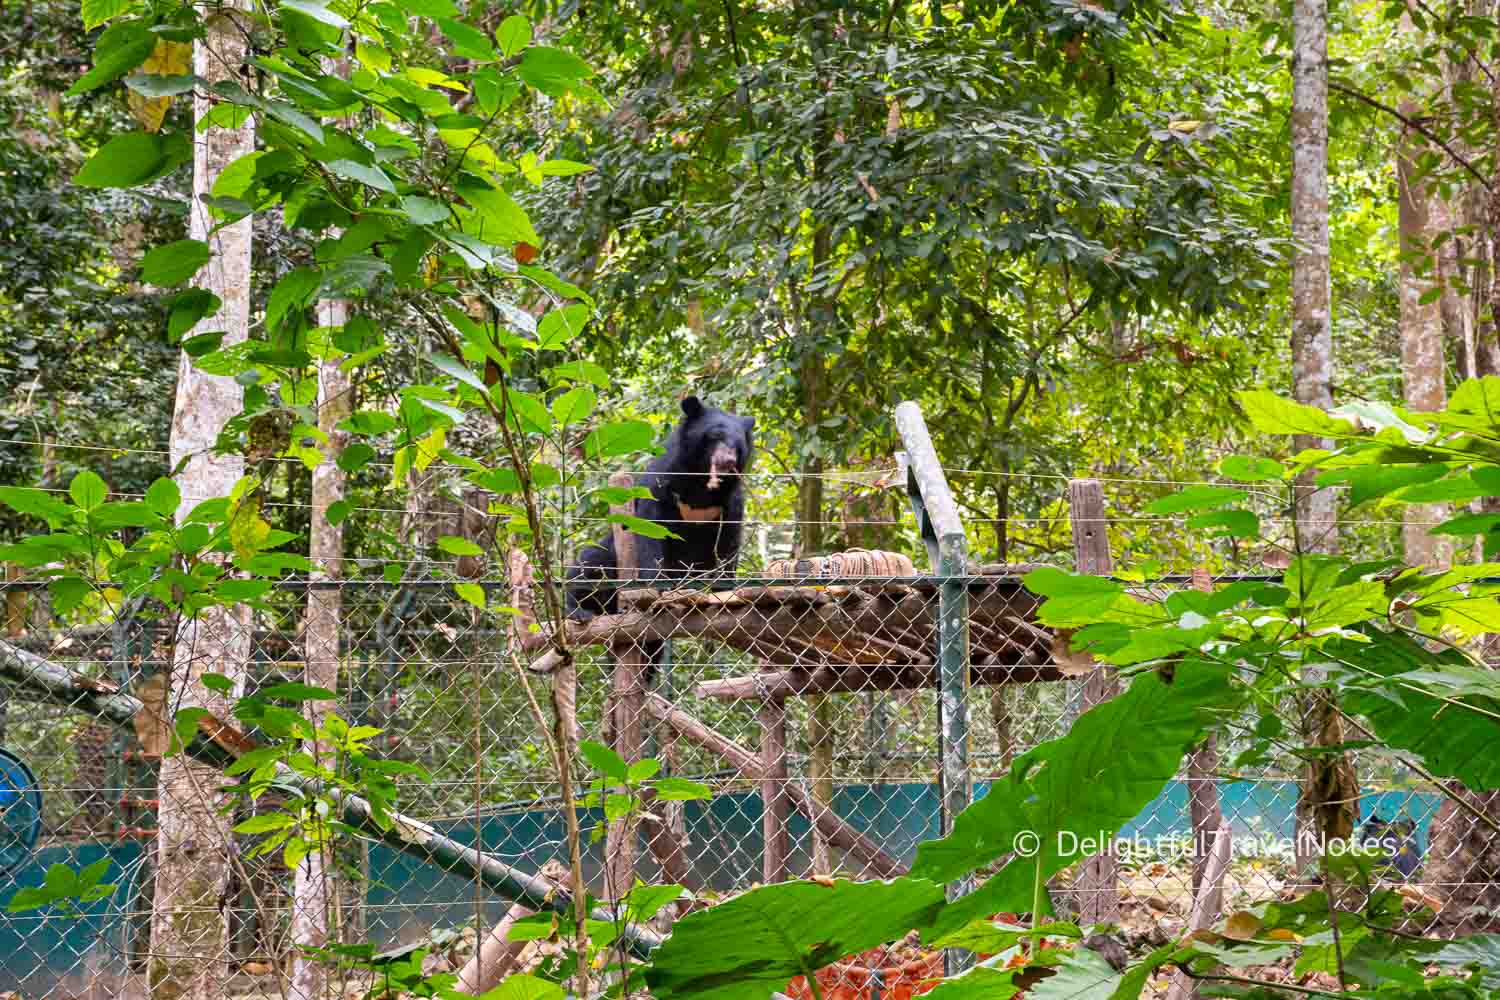 a bear inside the bear rescue area at Kuang Si Falls.